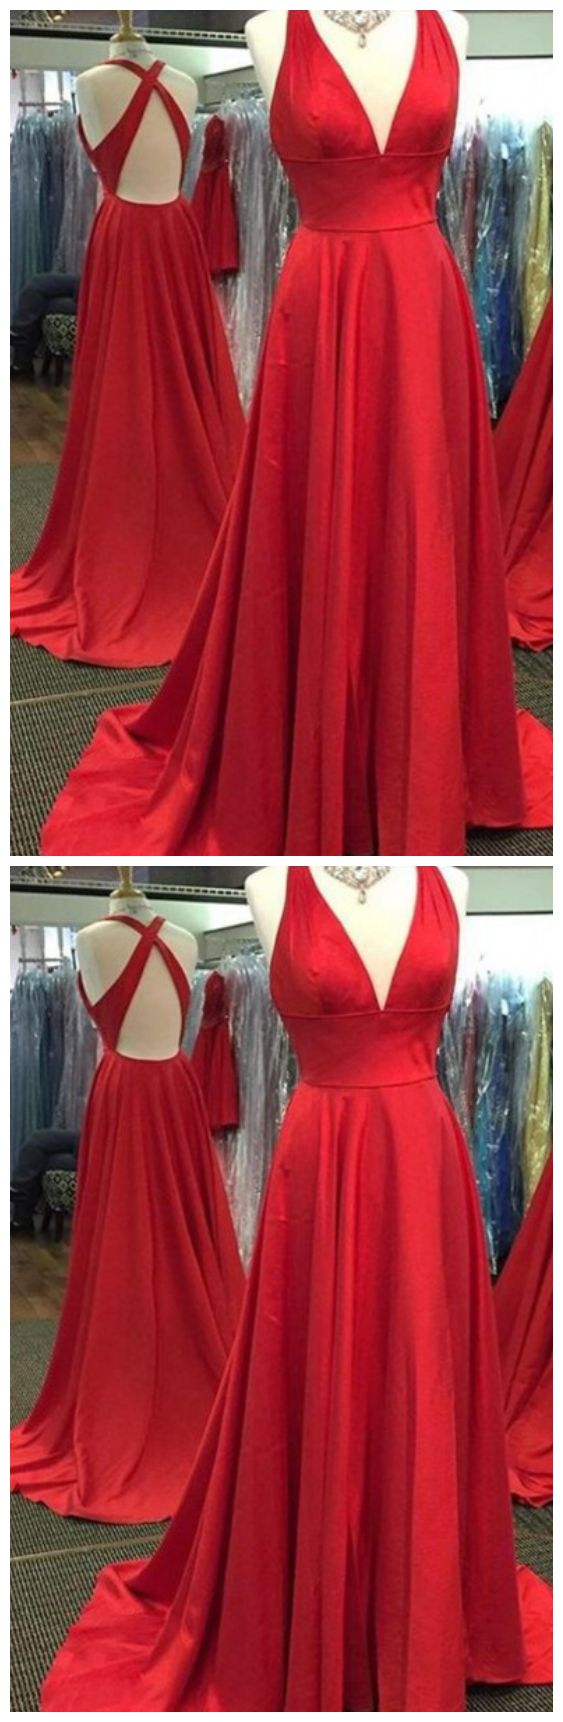 Sexy Prom Dress,long Lace Prom Dress,v-neck Prom Dress,prom Dresses A-line,prom Dresses Sexy Long,evening Dresses With Flowers